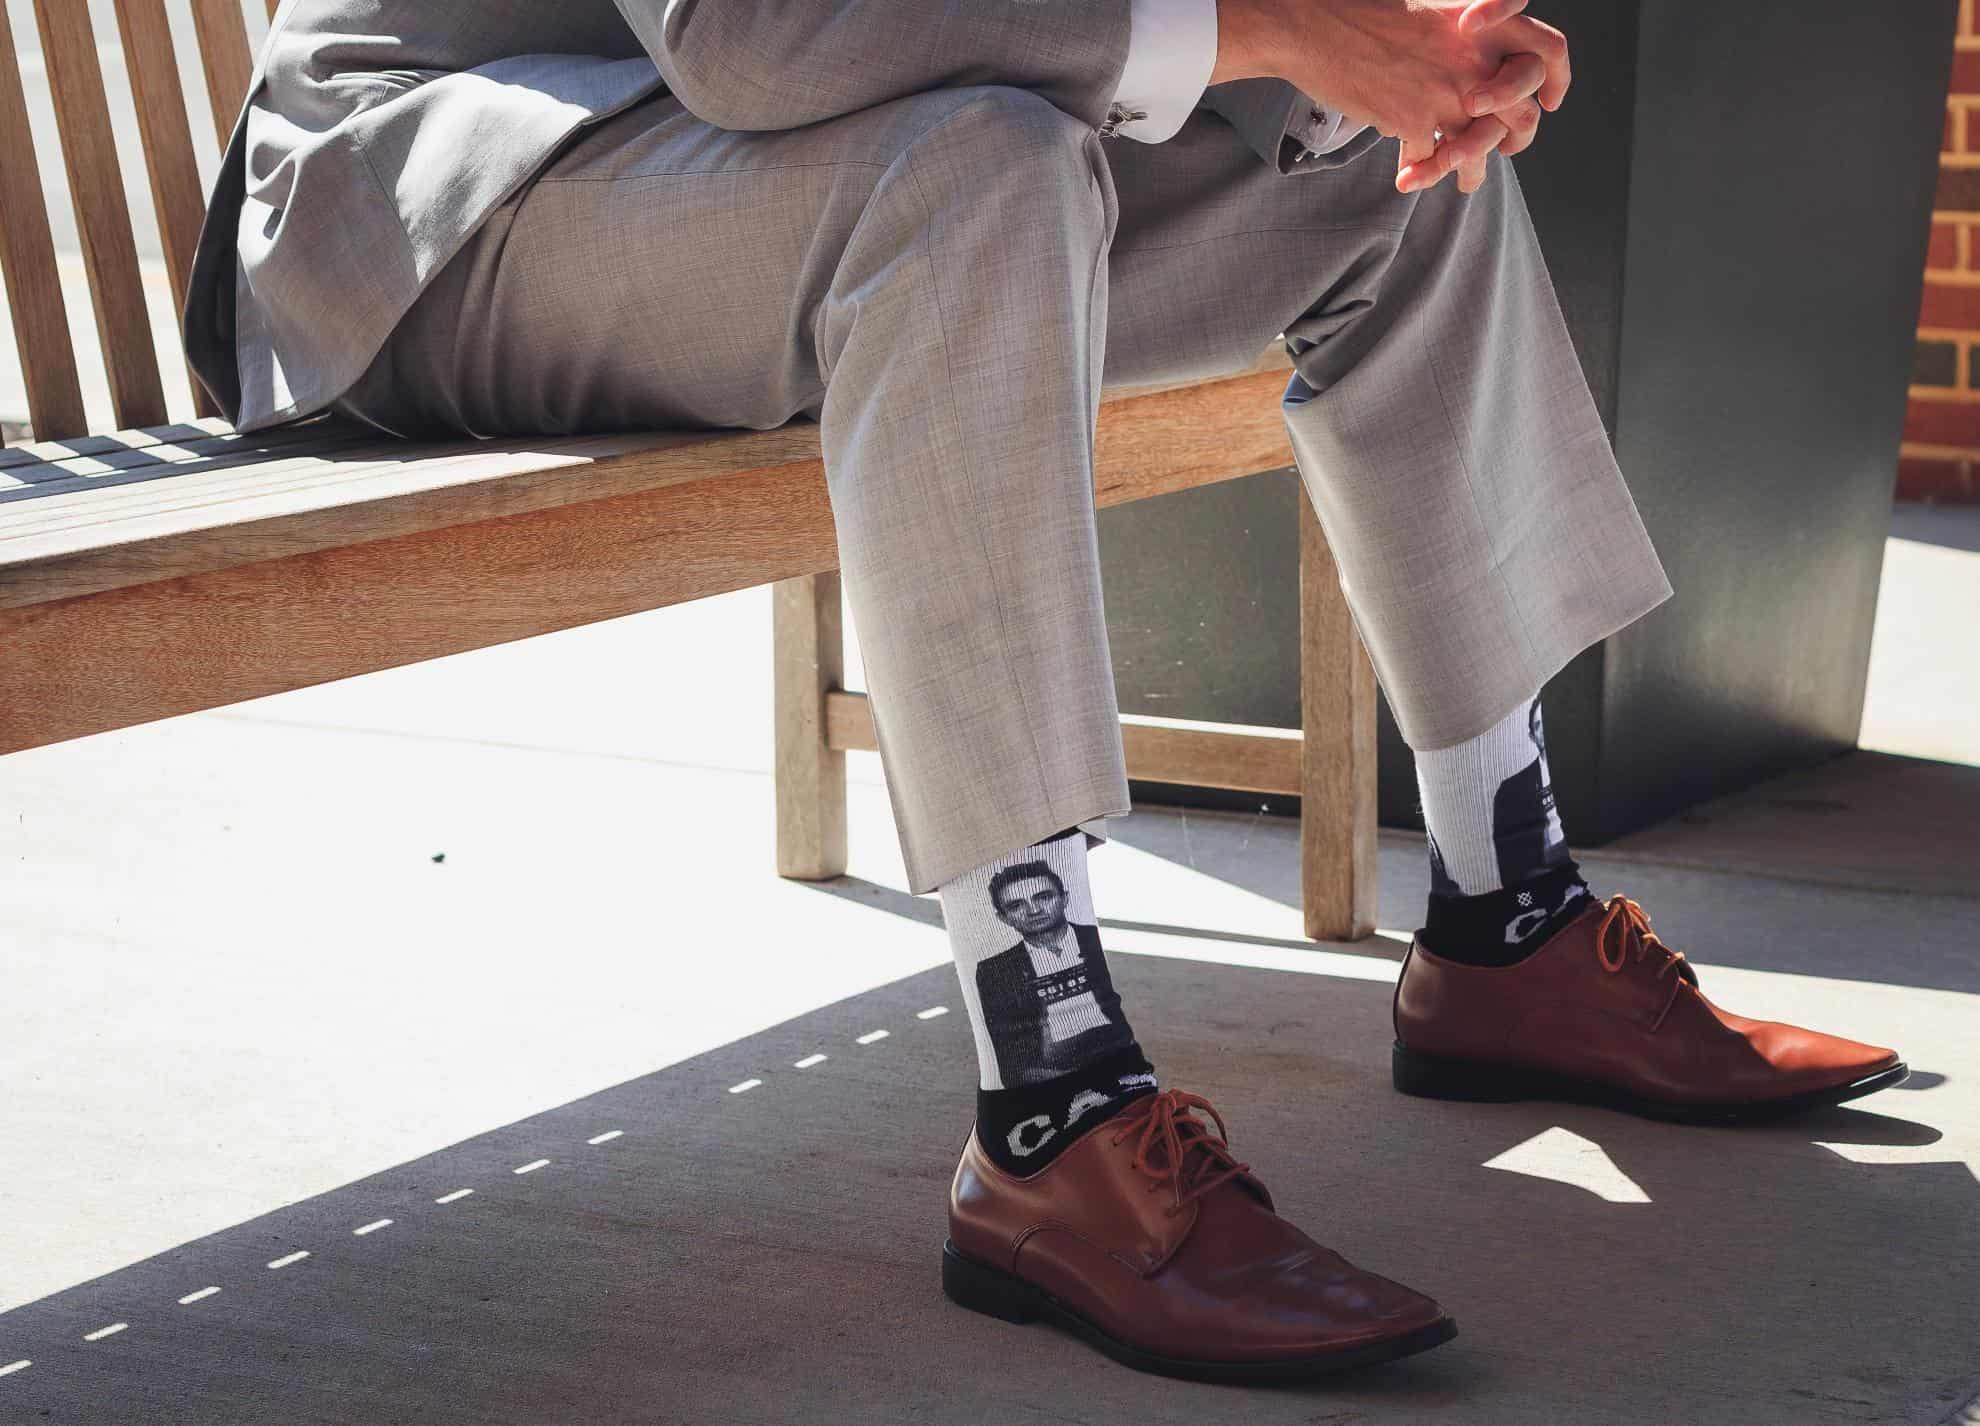 Printing on Socks, or a New Way to Be Different